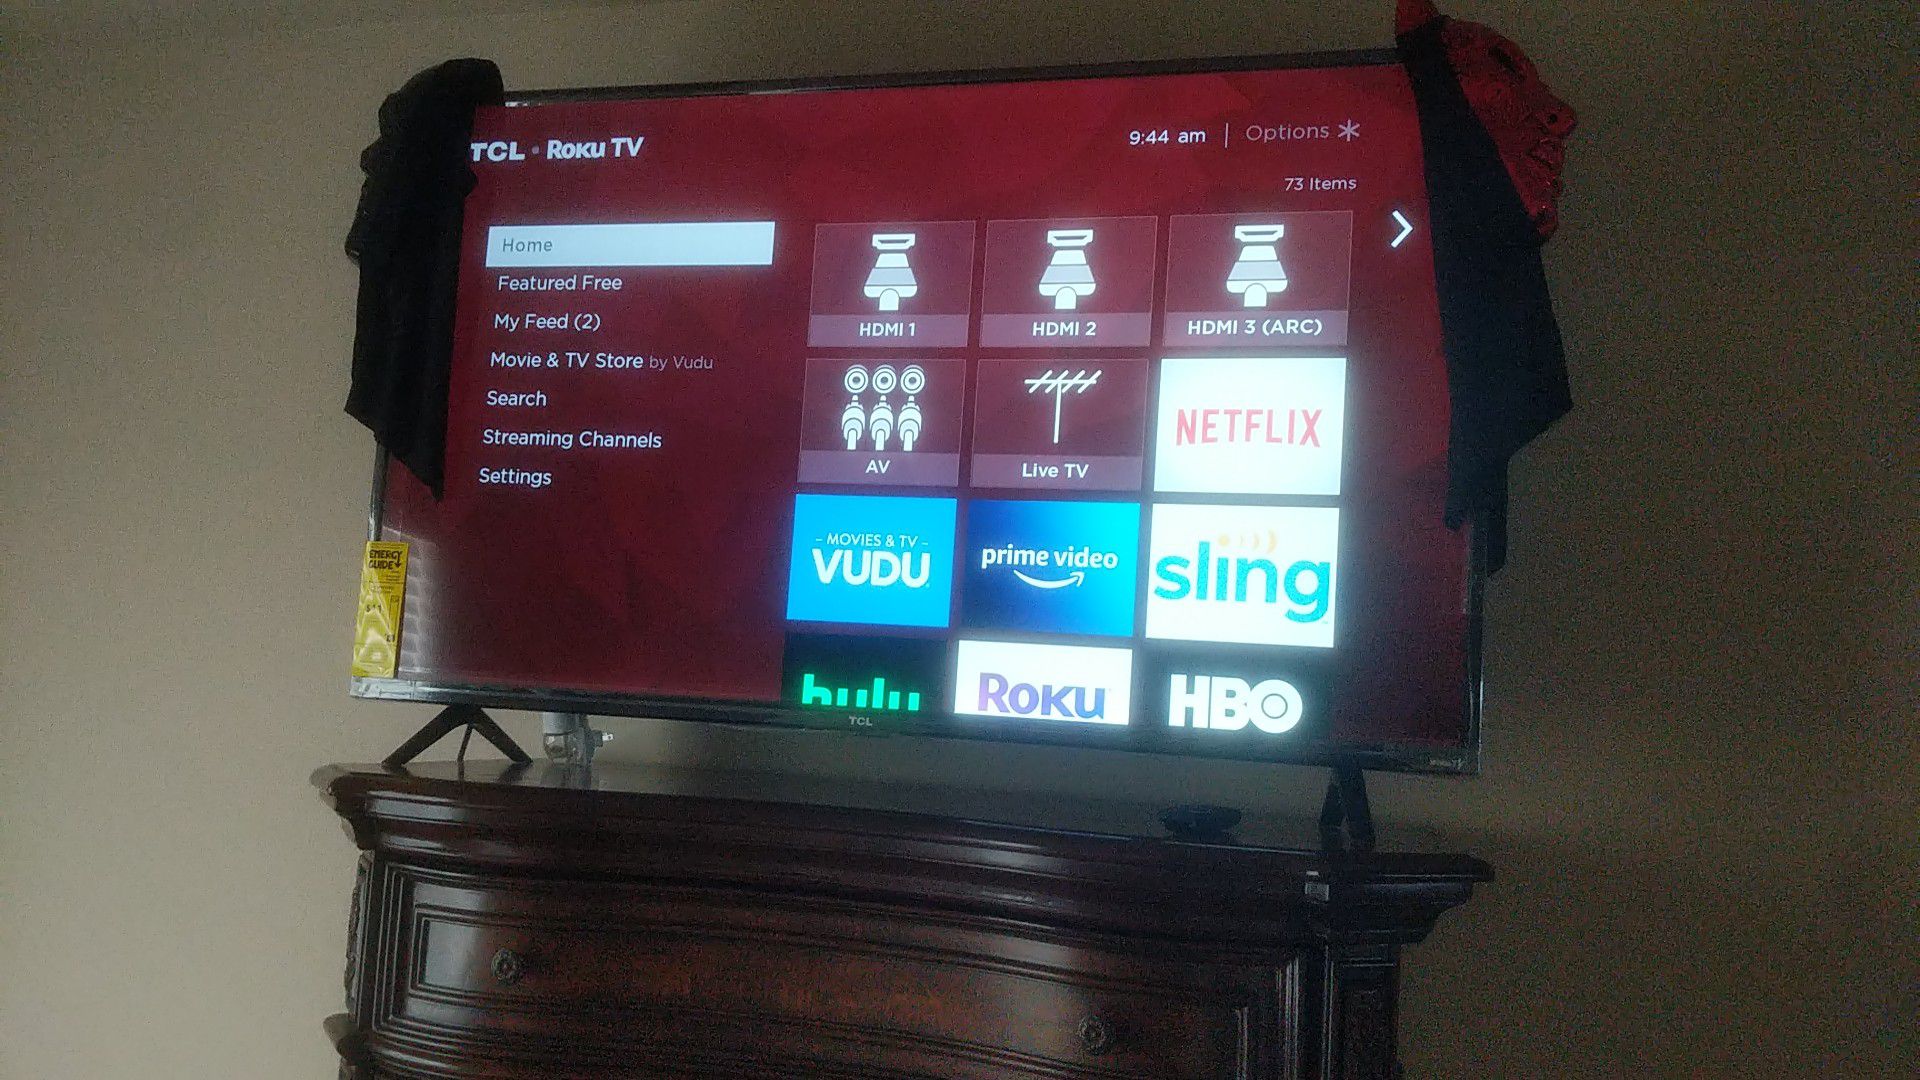 Tcl roku 47" new voice remote + Everything still new and in perfect condition